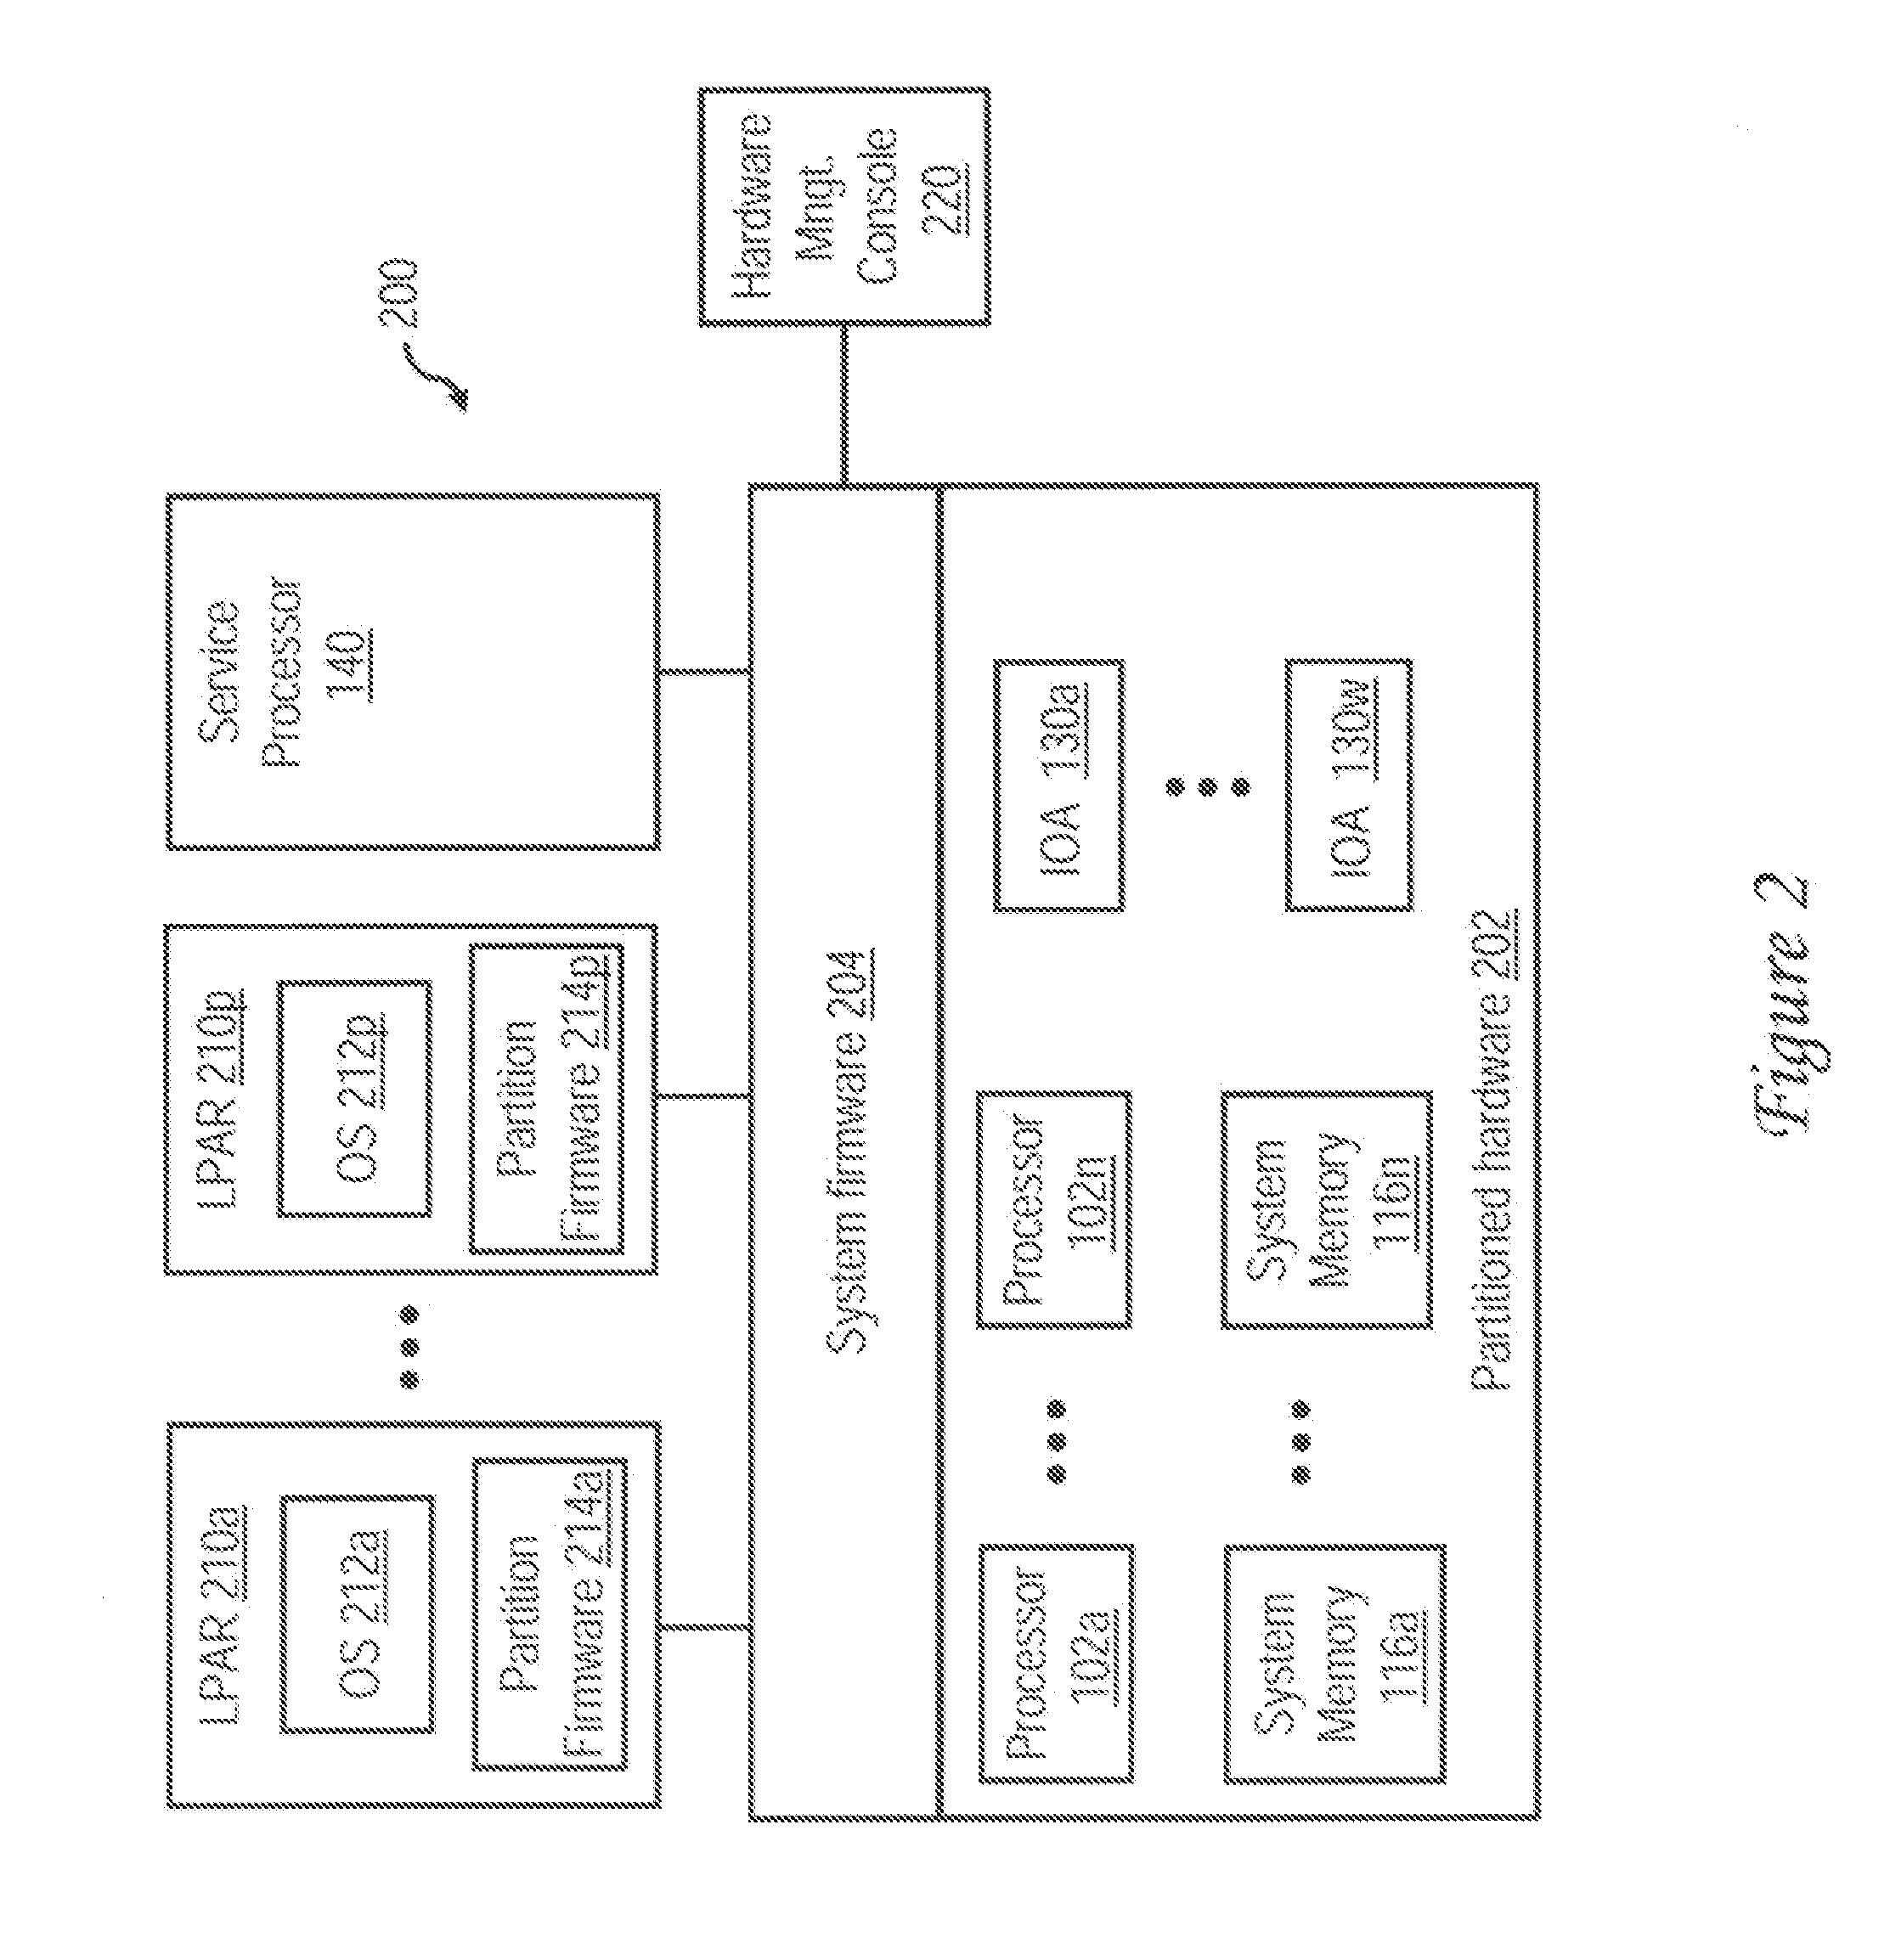 Interrupt source controller with scalable state structures